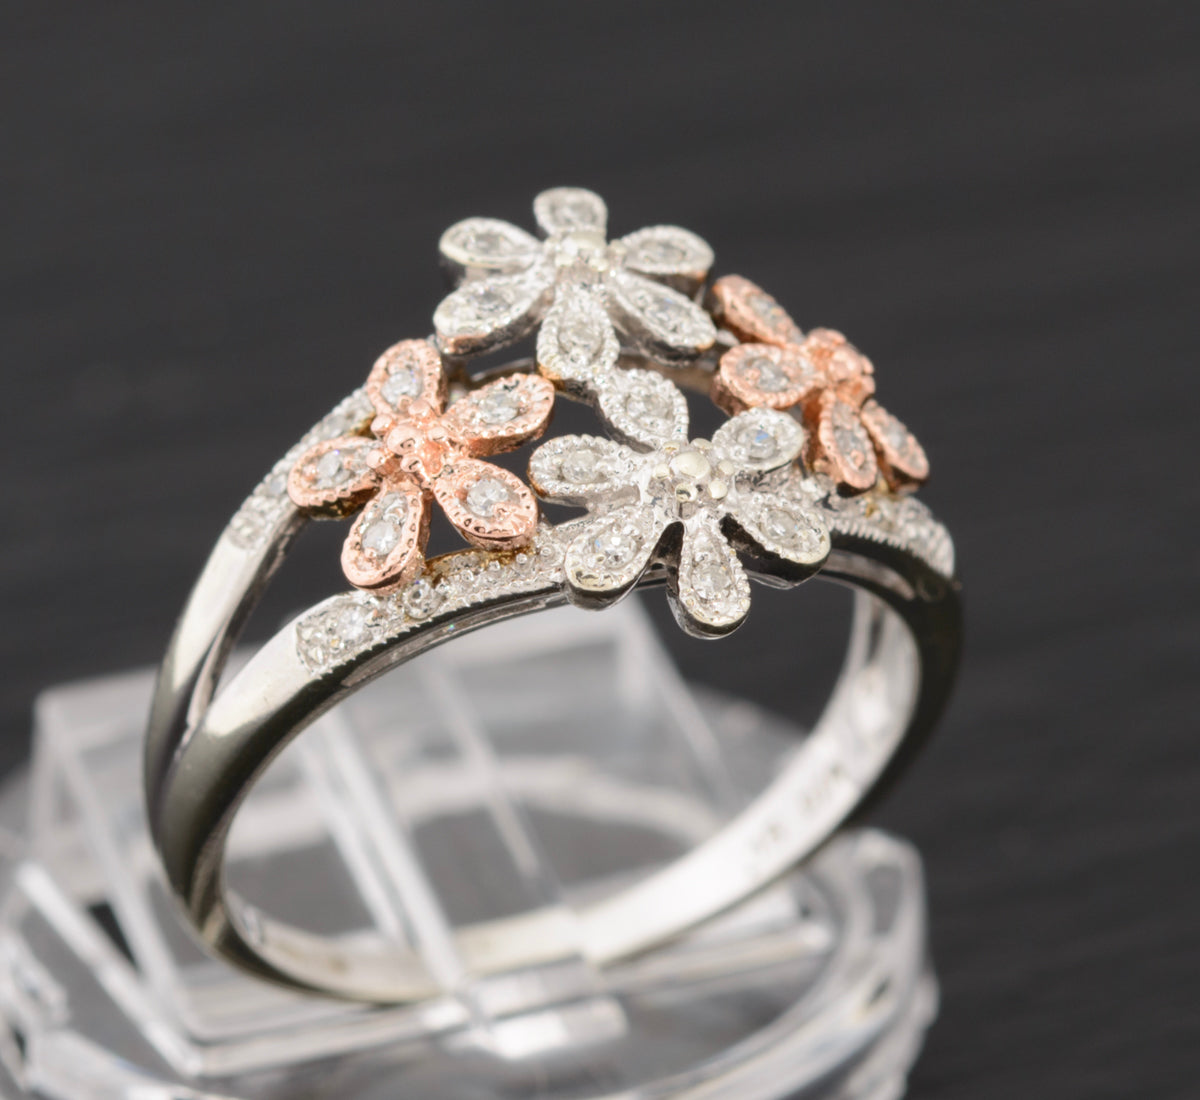 Feminine 9ct White & Rose Gold Flower Head Ring With Diamonds UK Size S (A1469)